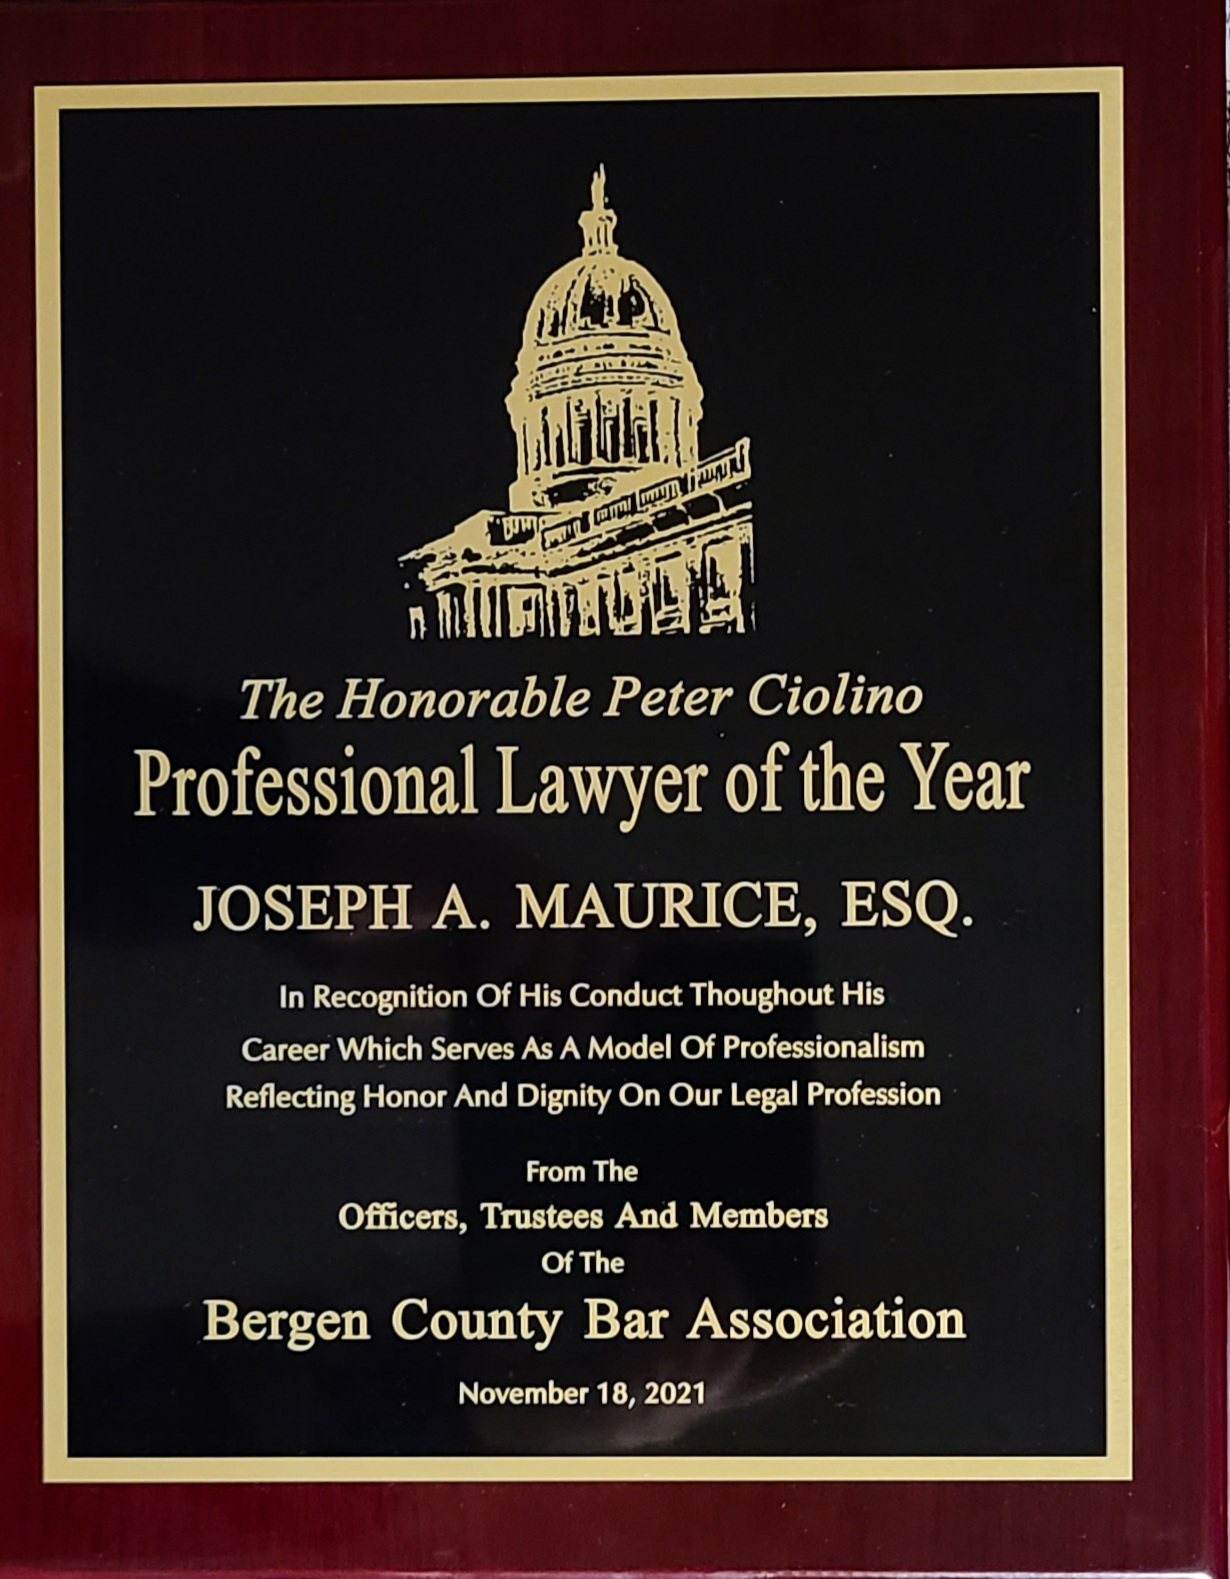 Maurice Recognized as Professional Lawyer of the Year